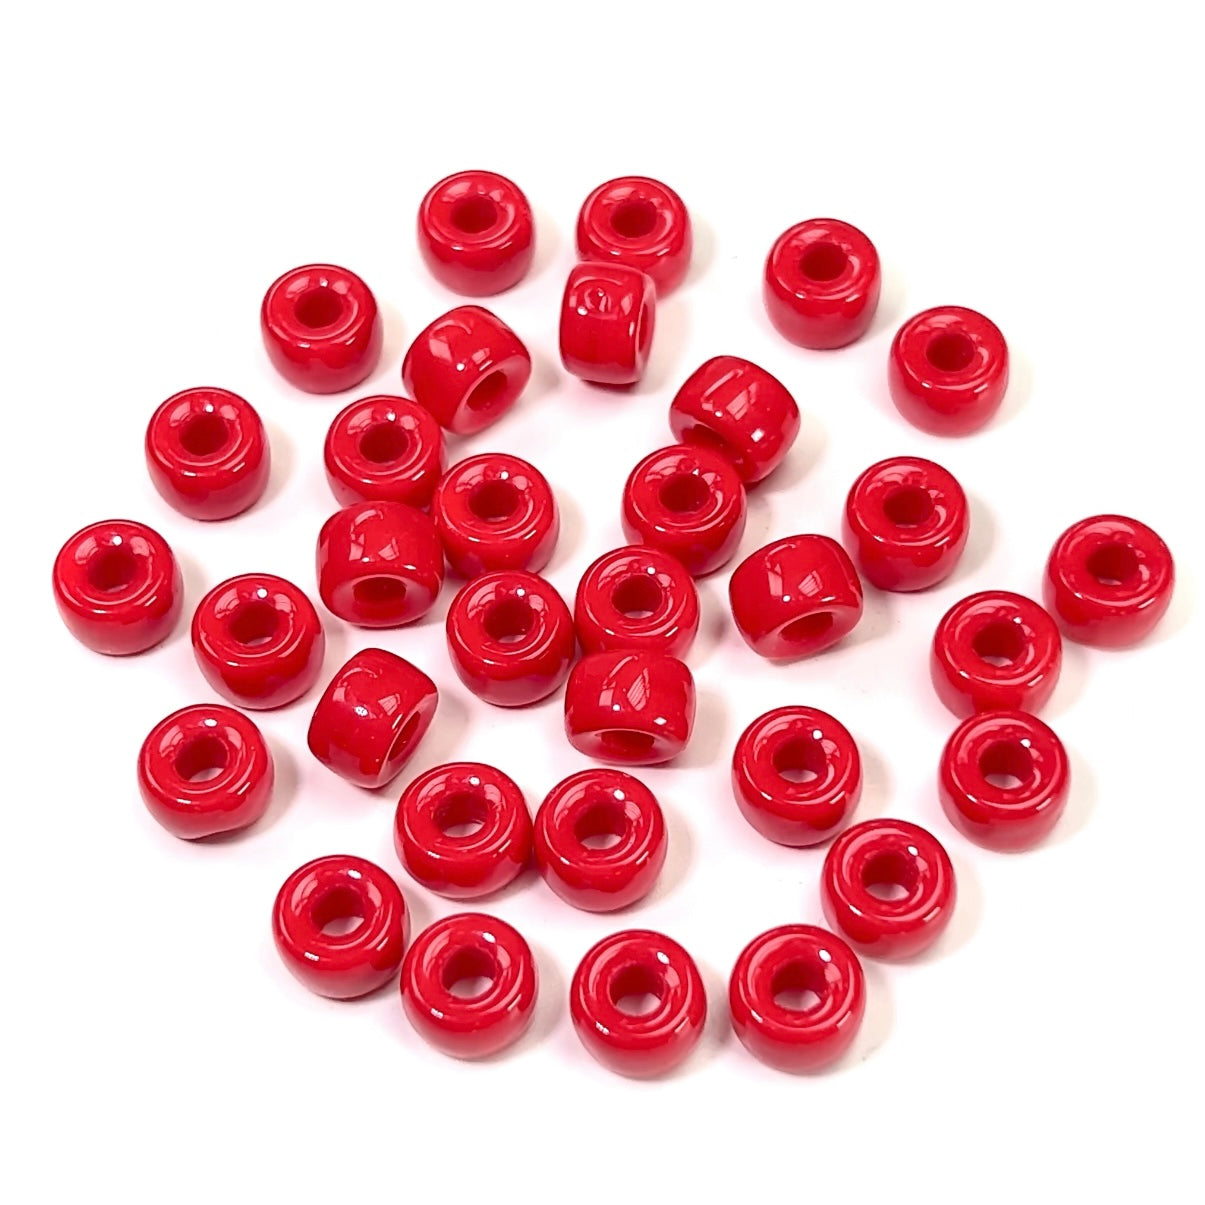 Czech Glass Druk Large Hole Beads in size 9mm, Red Coral Opaque, 30pcs, J086